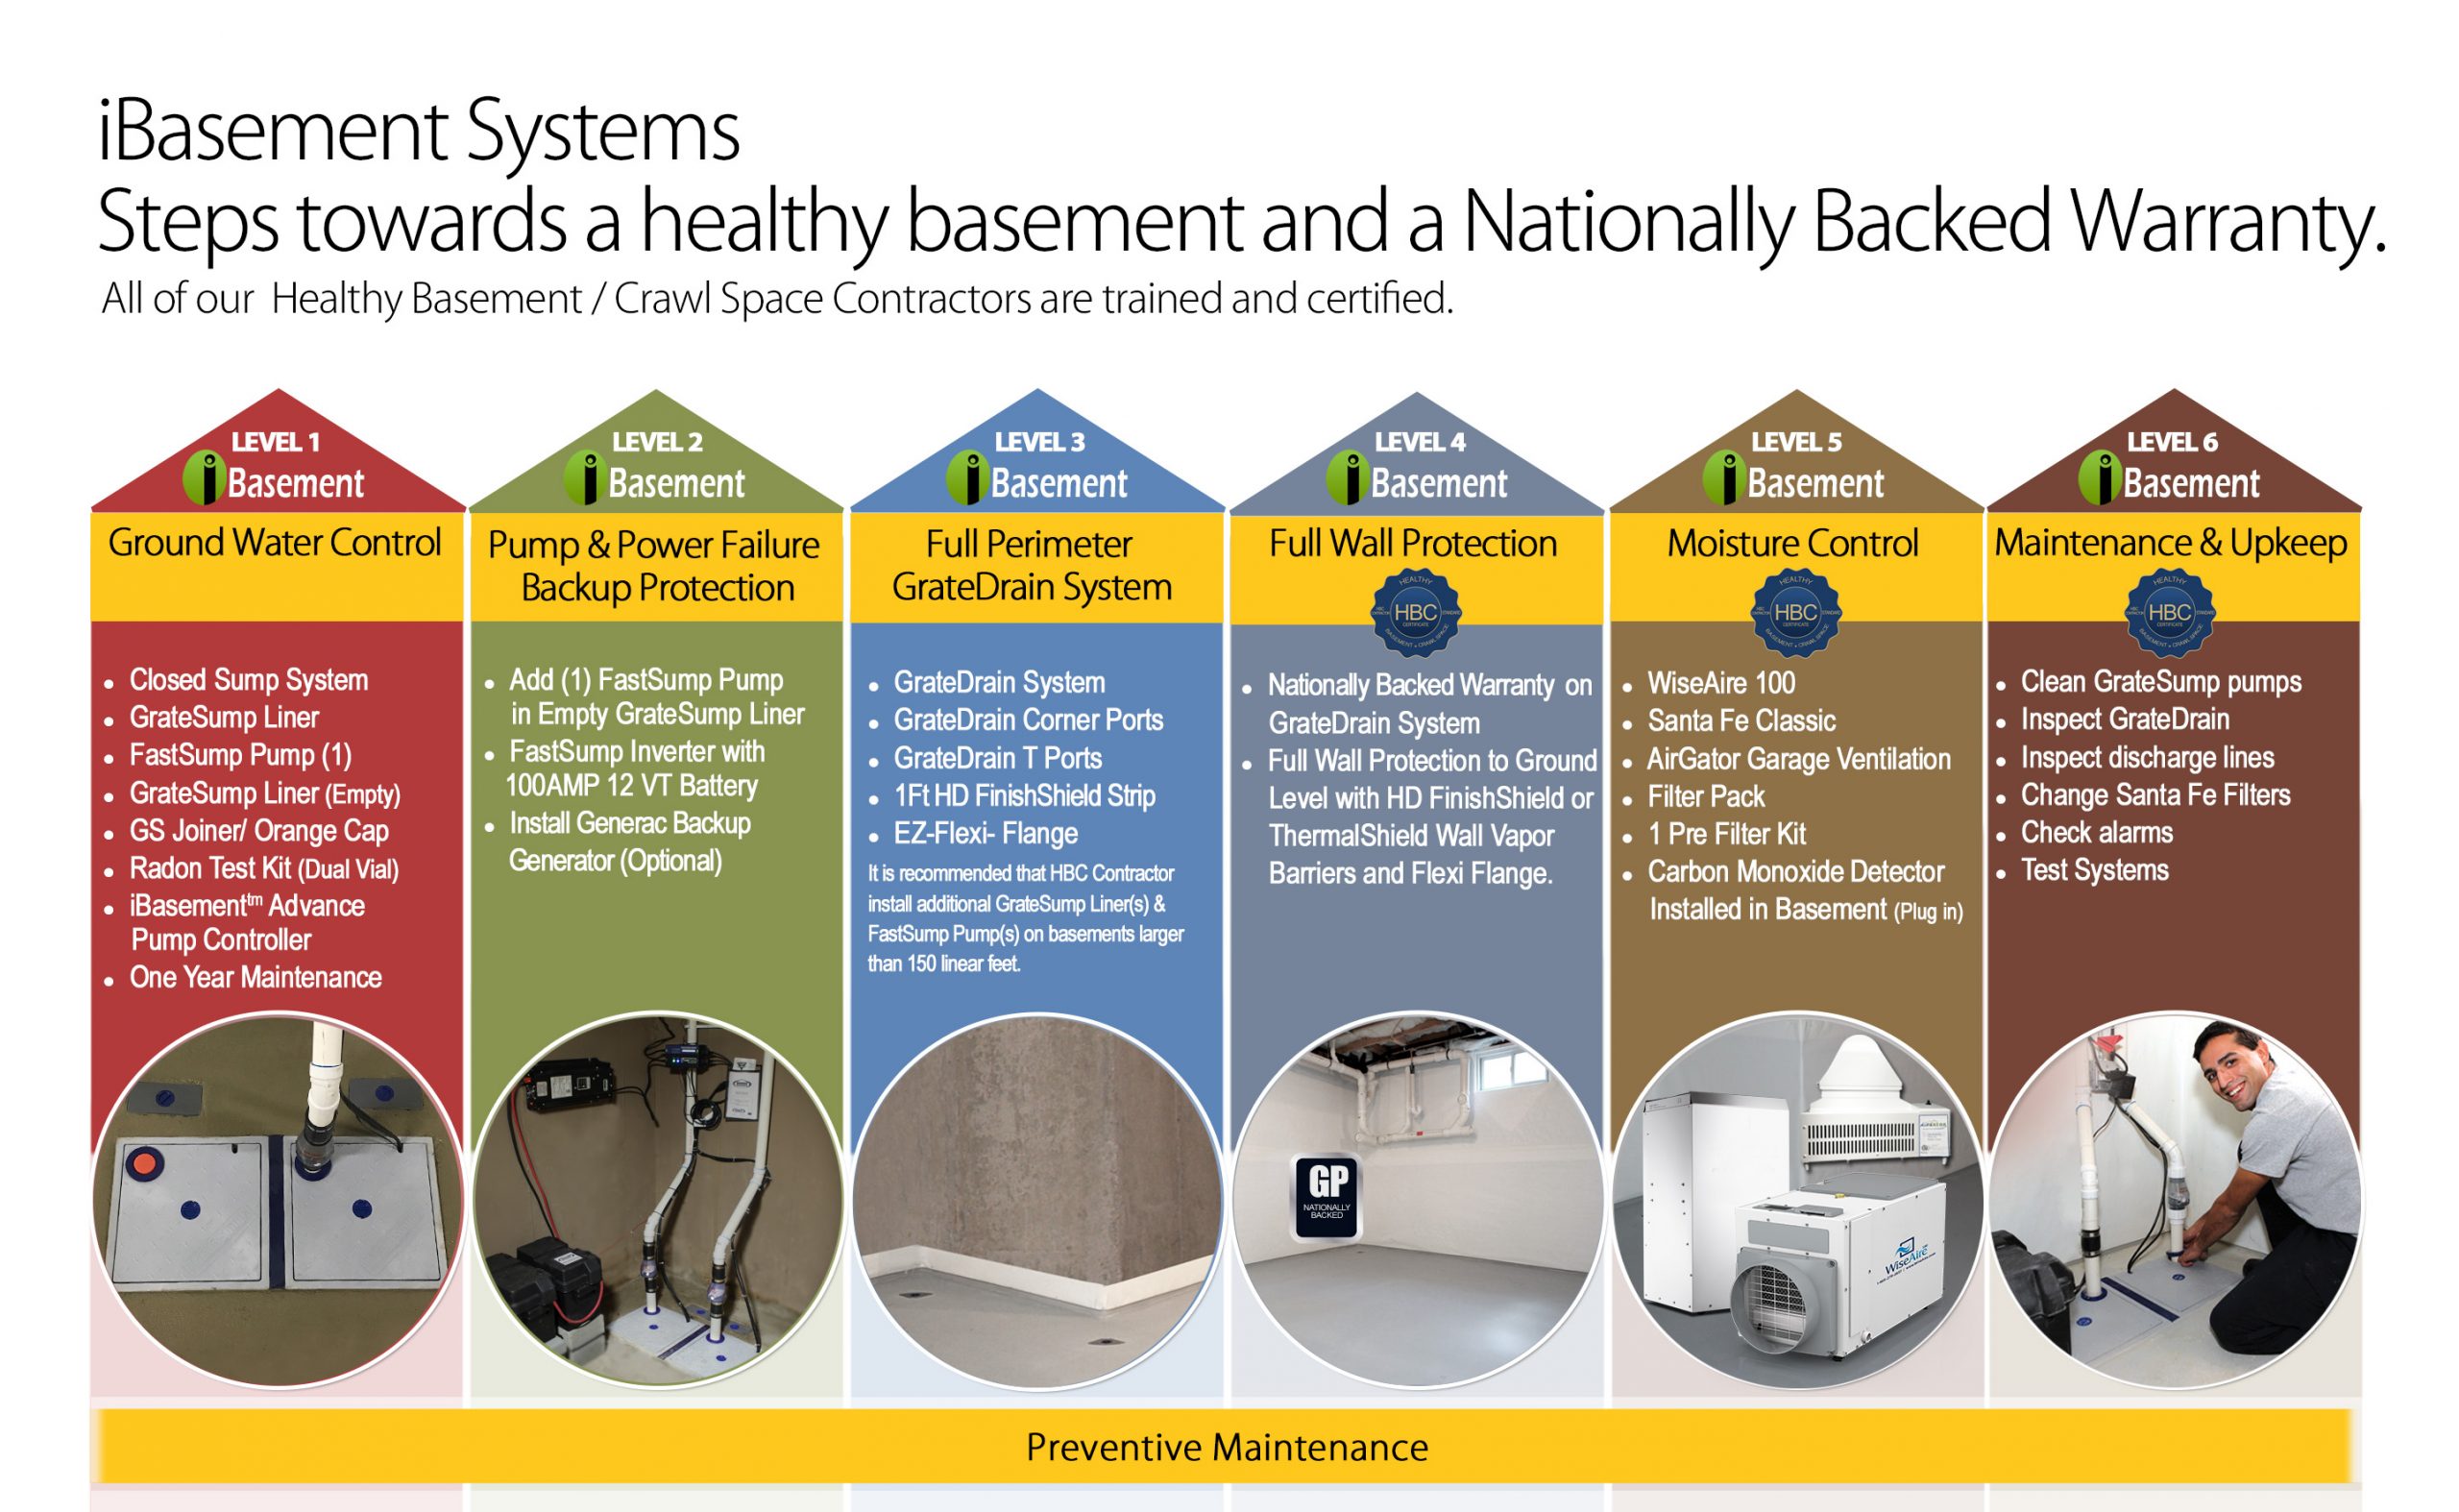 iBasement™ Systems levels